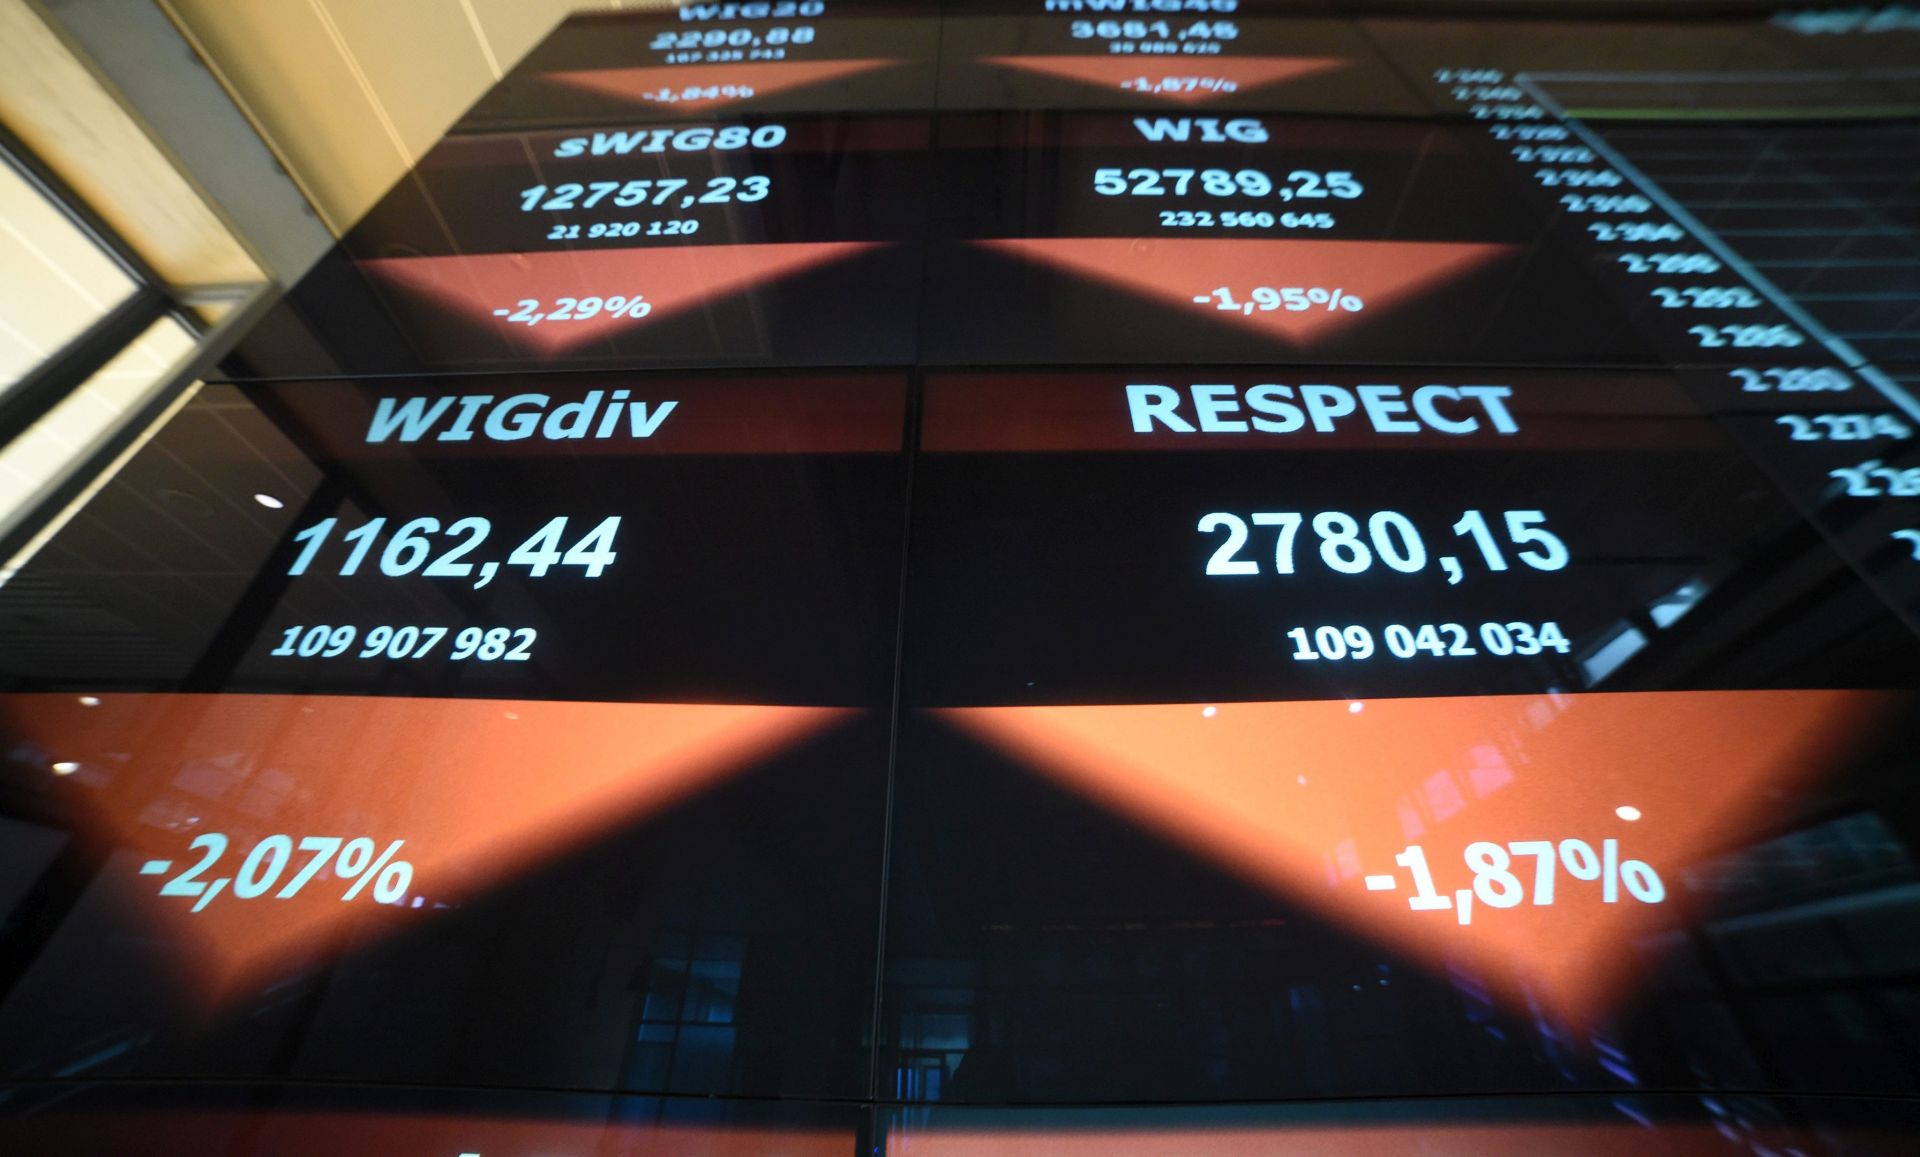 epa04823373 A view of a display board showing the evolution of the WIG20 index at the Warsaw Stock Exchange, in Warsaw, Poland, 29 June 2015. The Polish WIG stock indices dropped due to concerns that Greece could default on its debts and crash out of the eurozone.  EPA/RADEK PIETRUSZKA POLAND OUT